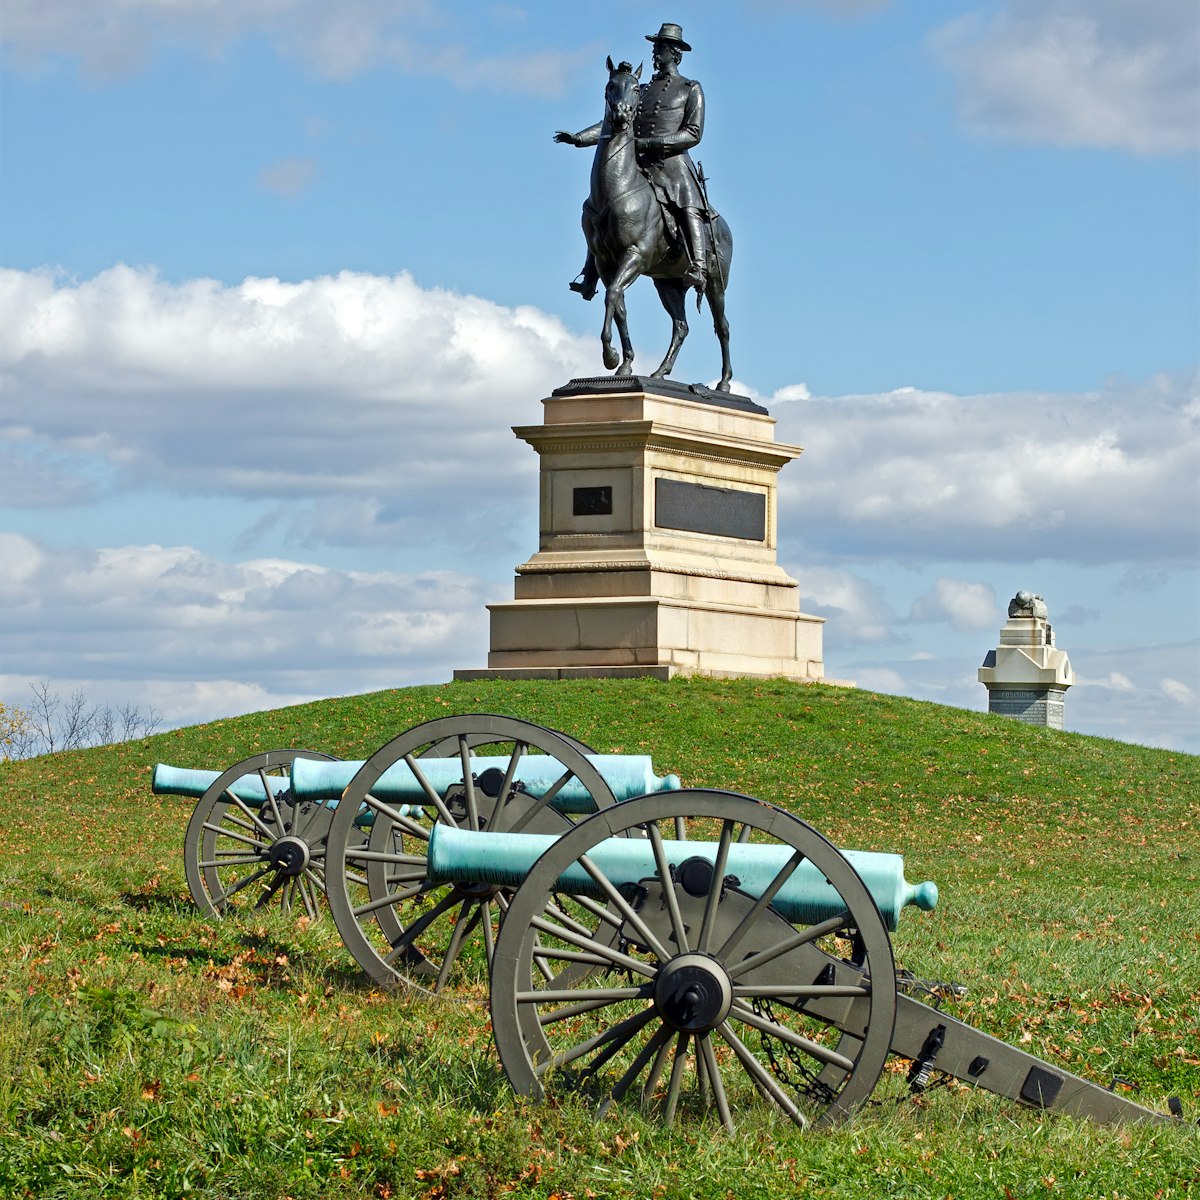 A monument to Major General Winfield Scott Hancock at Gettysburg National Military Park.It was dedicated in 1896 by the Commonwealth of Pennsylvania.
149134859
gun, war, park, fall, hero, army, battle, cannon, autumn, statue, weapon, general, warfare, america, tourism, history, vintage, military, monument, historic, artillery, historical, gettysburg, battlefield, civil war, pennsylvania, adams county, tourist attractionl, winfield scott hancock, gettysburg national military park